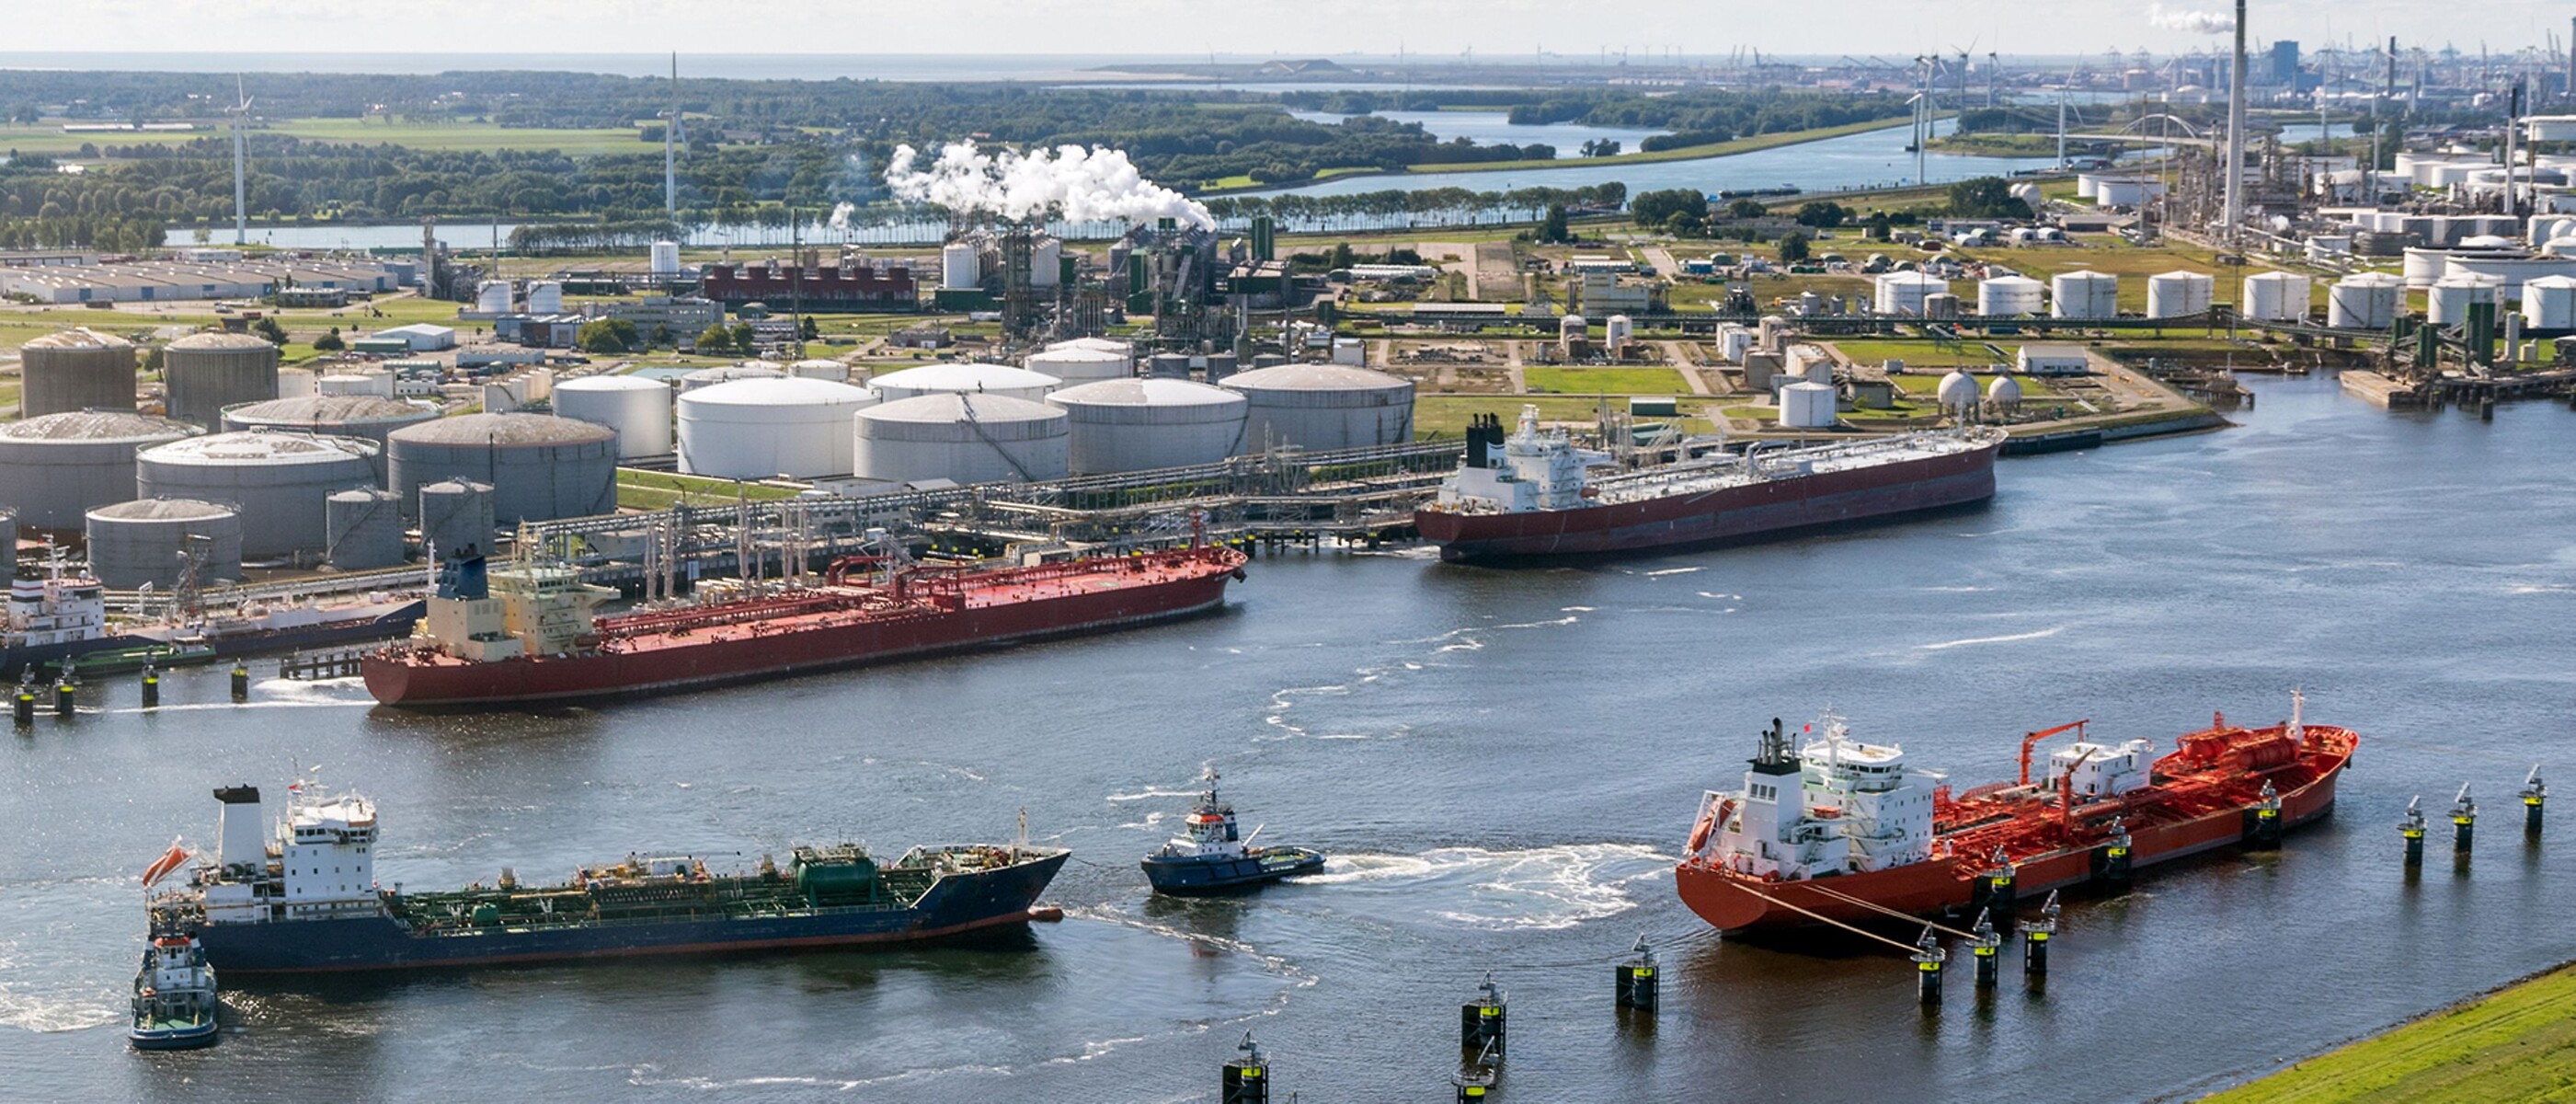 Two barges on a river preparing to dock at a large refinery